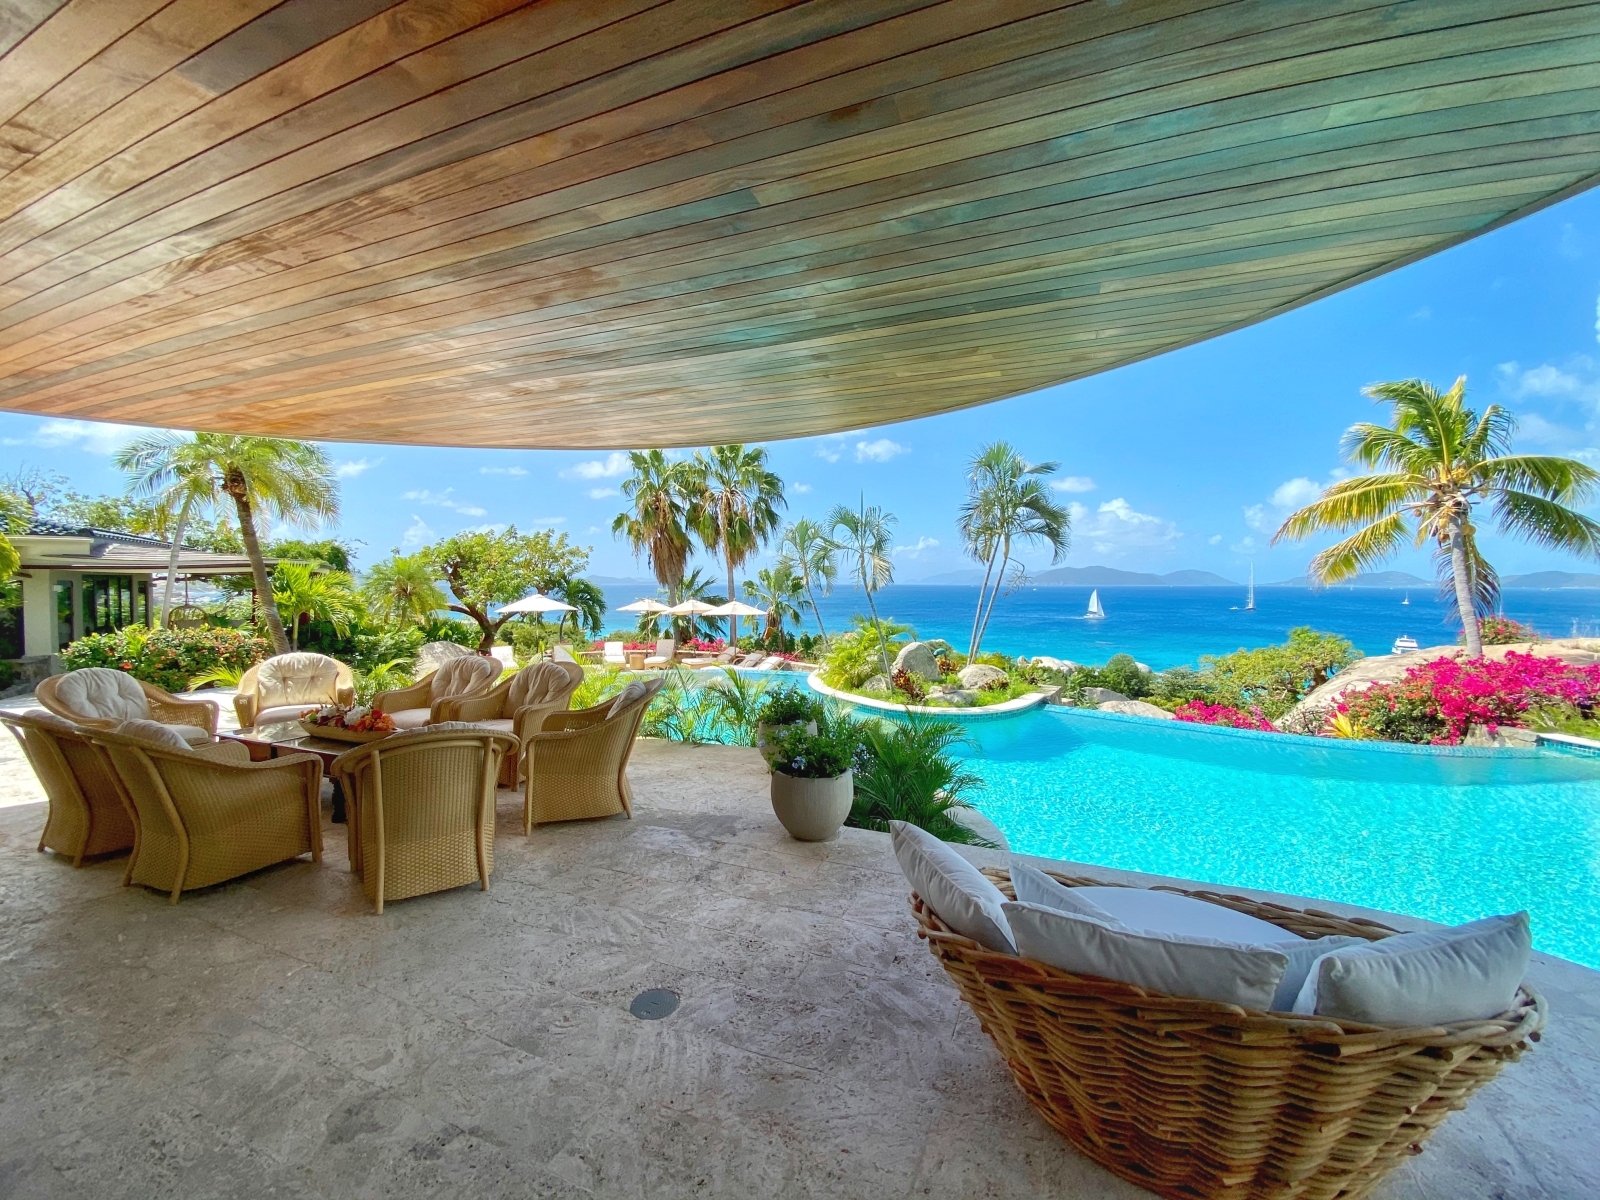 Terrace next to pool with comfy chairs, table and sea view at Valley Trunk on the British Virgin Islands, Caribbean